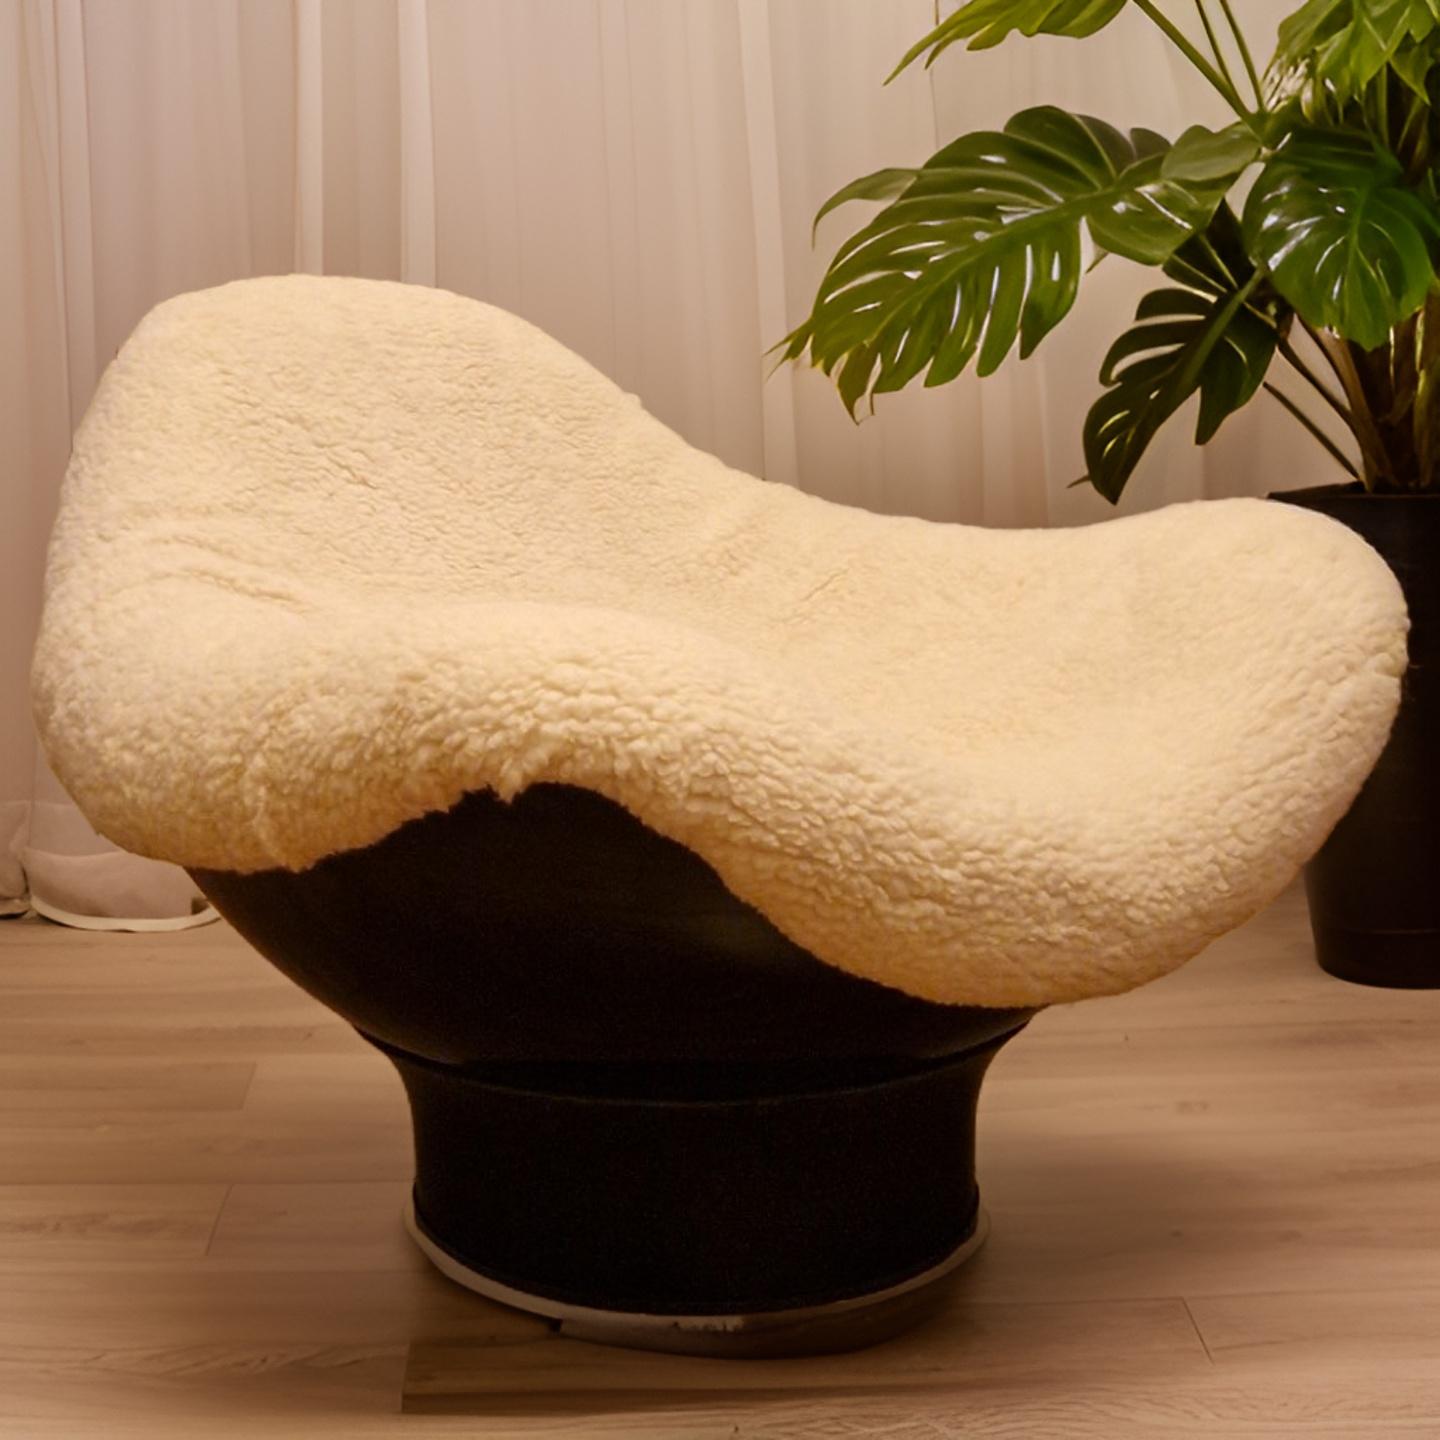 Space age lounge chair. Made from fiberglass. The shell stands on a trumpet base and can be moved in any direction. 

Designed by Mario Bruno in 1964 and produced by Comfort, Italy. Also known for the iconic Elda chair by Joe Colombo. 

An Italian